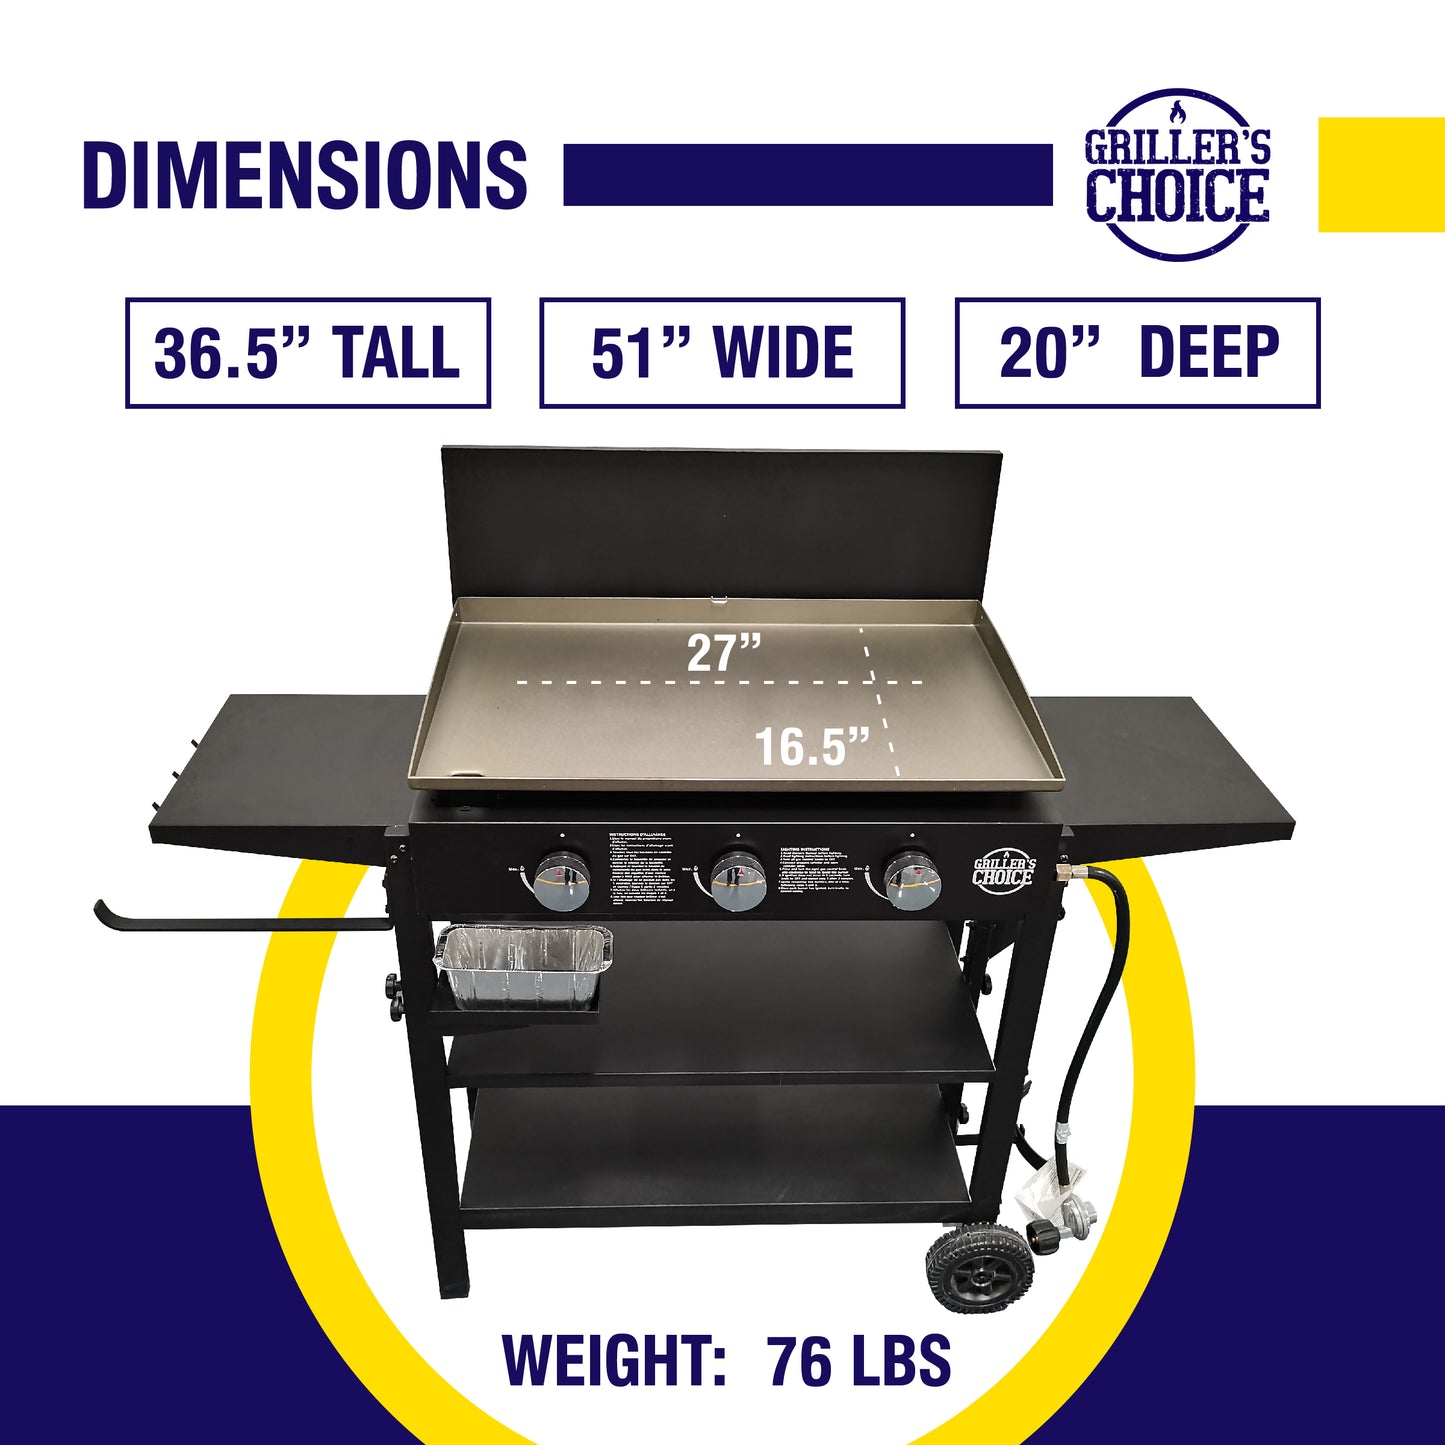 Griller's Choice Outdoor Griddle Grill Propane Gas Flat Top - Hood Included, 36,000 BTU's and 450 sq inch Flat Top Grill, Paper Towel Holder